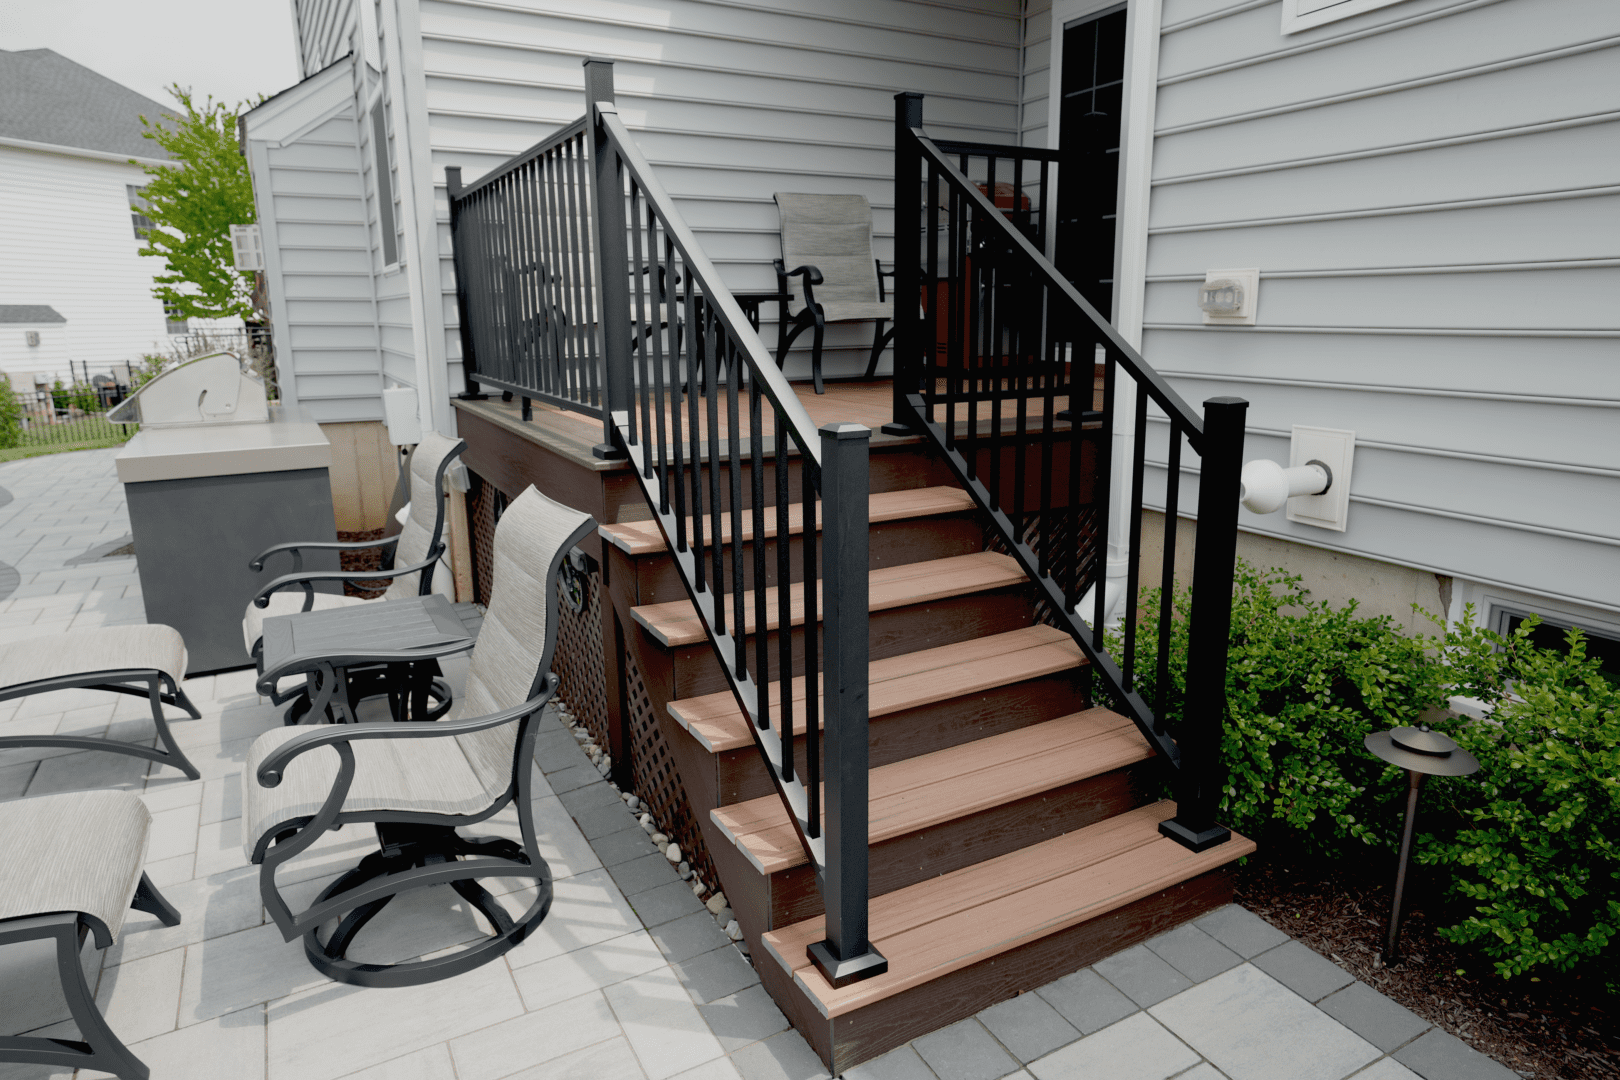 A patio with custom structures, including chairs and a stair railing.